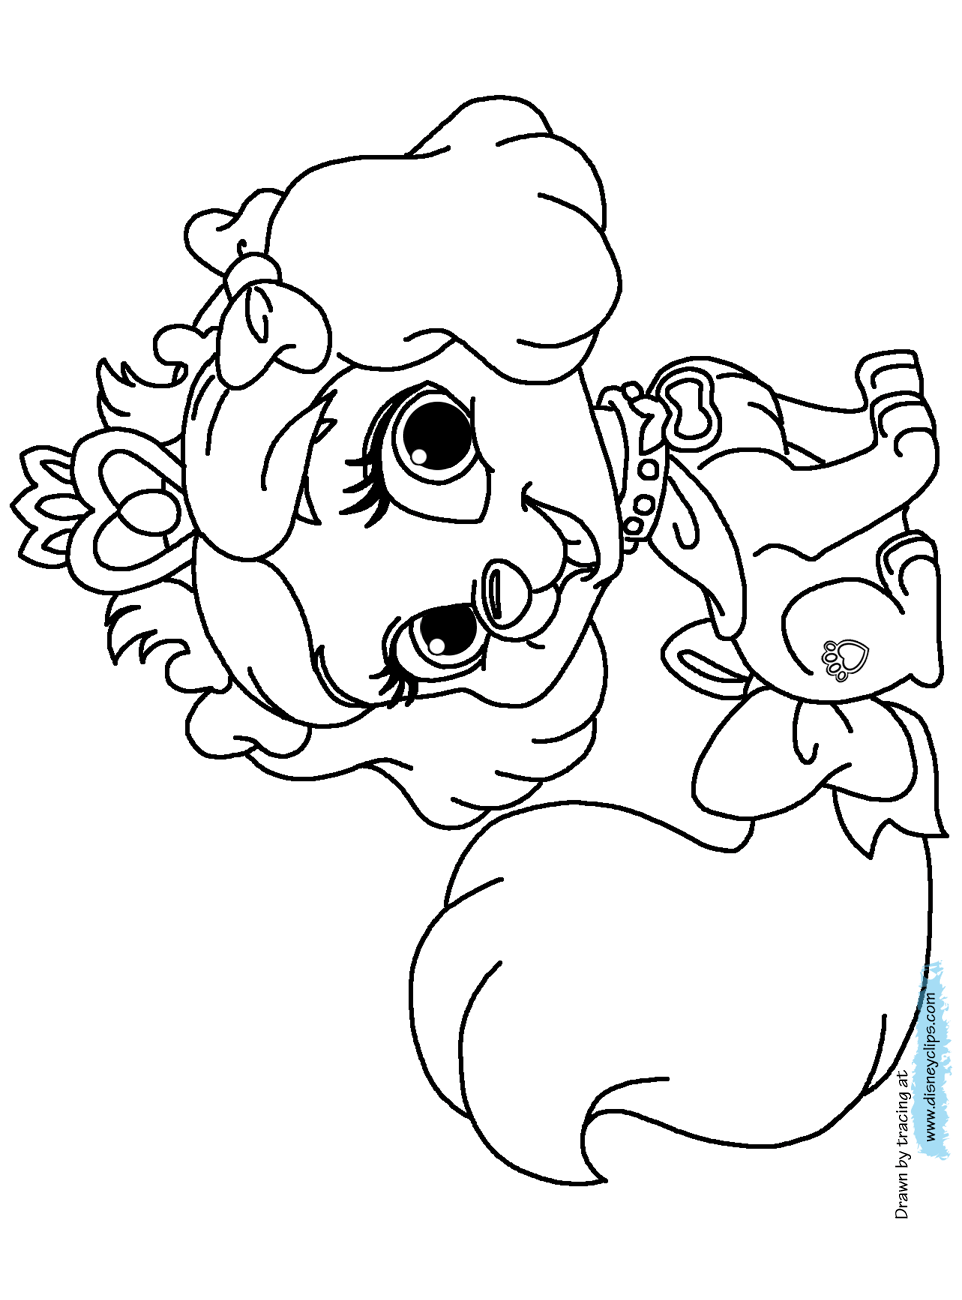 pet colouring pets coloring pages best coloring pages for kids colouring pet 